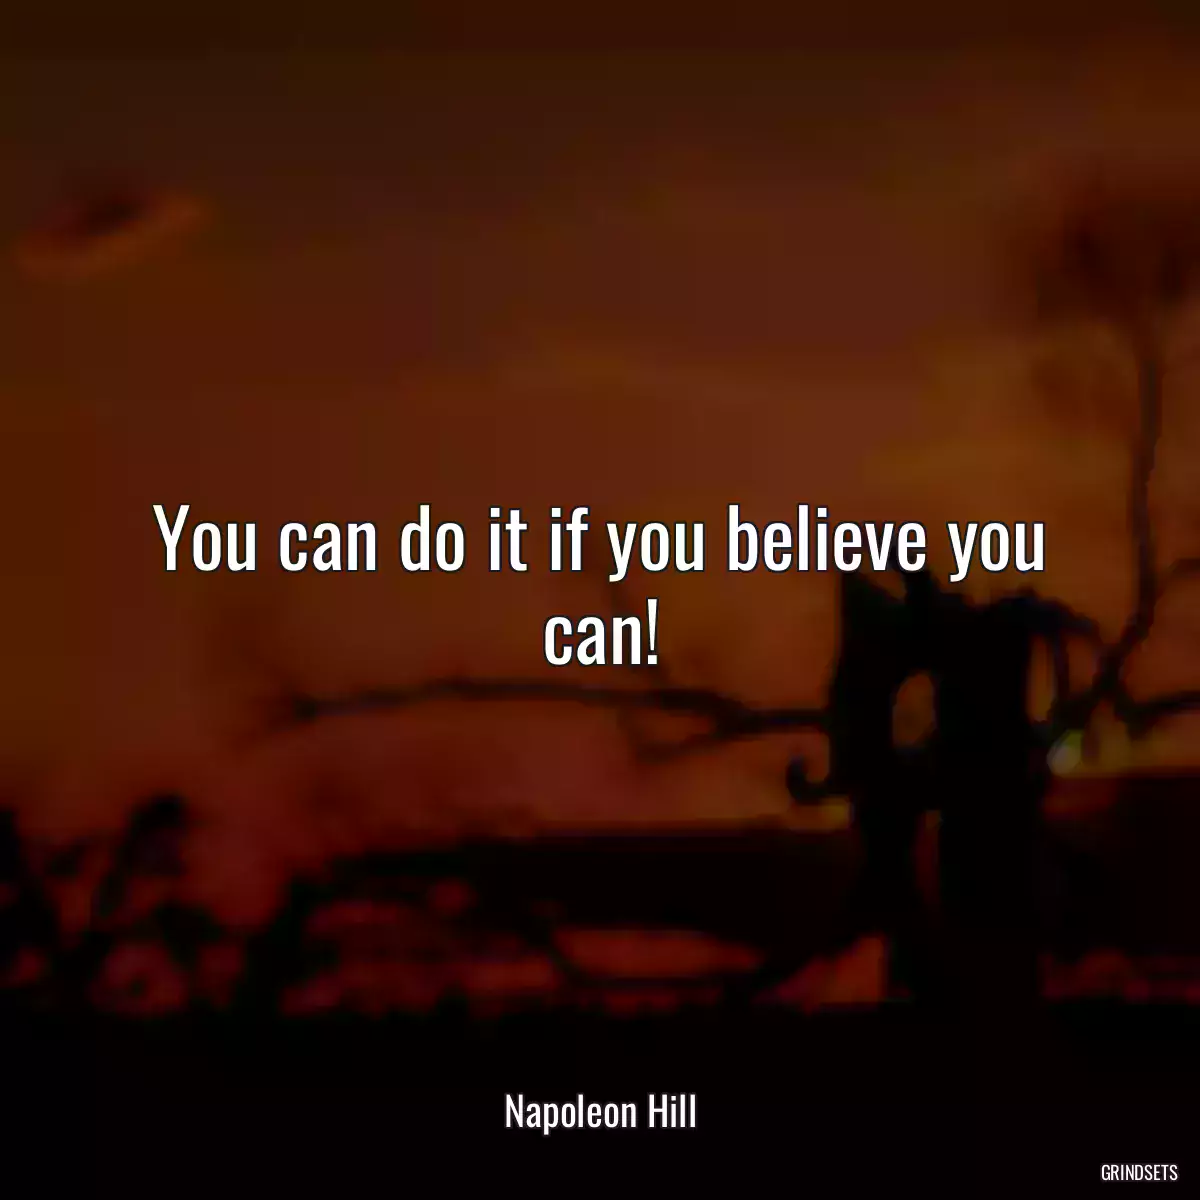 You can do it if you believe you can!